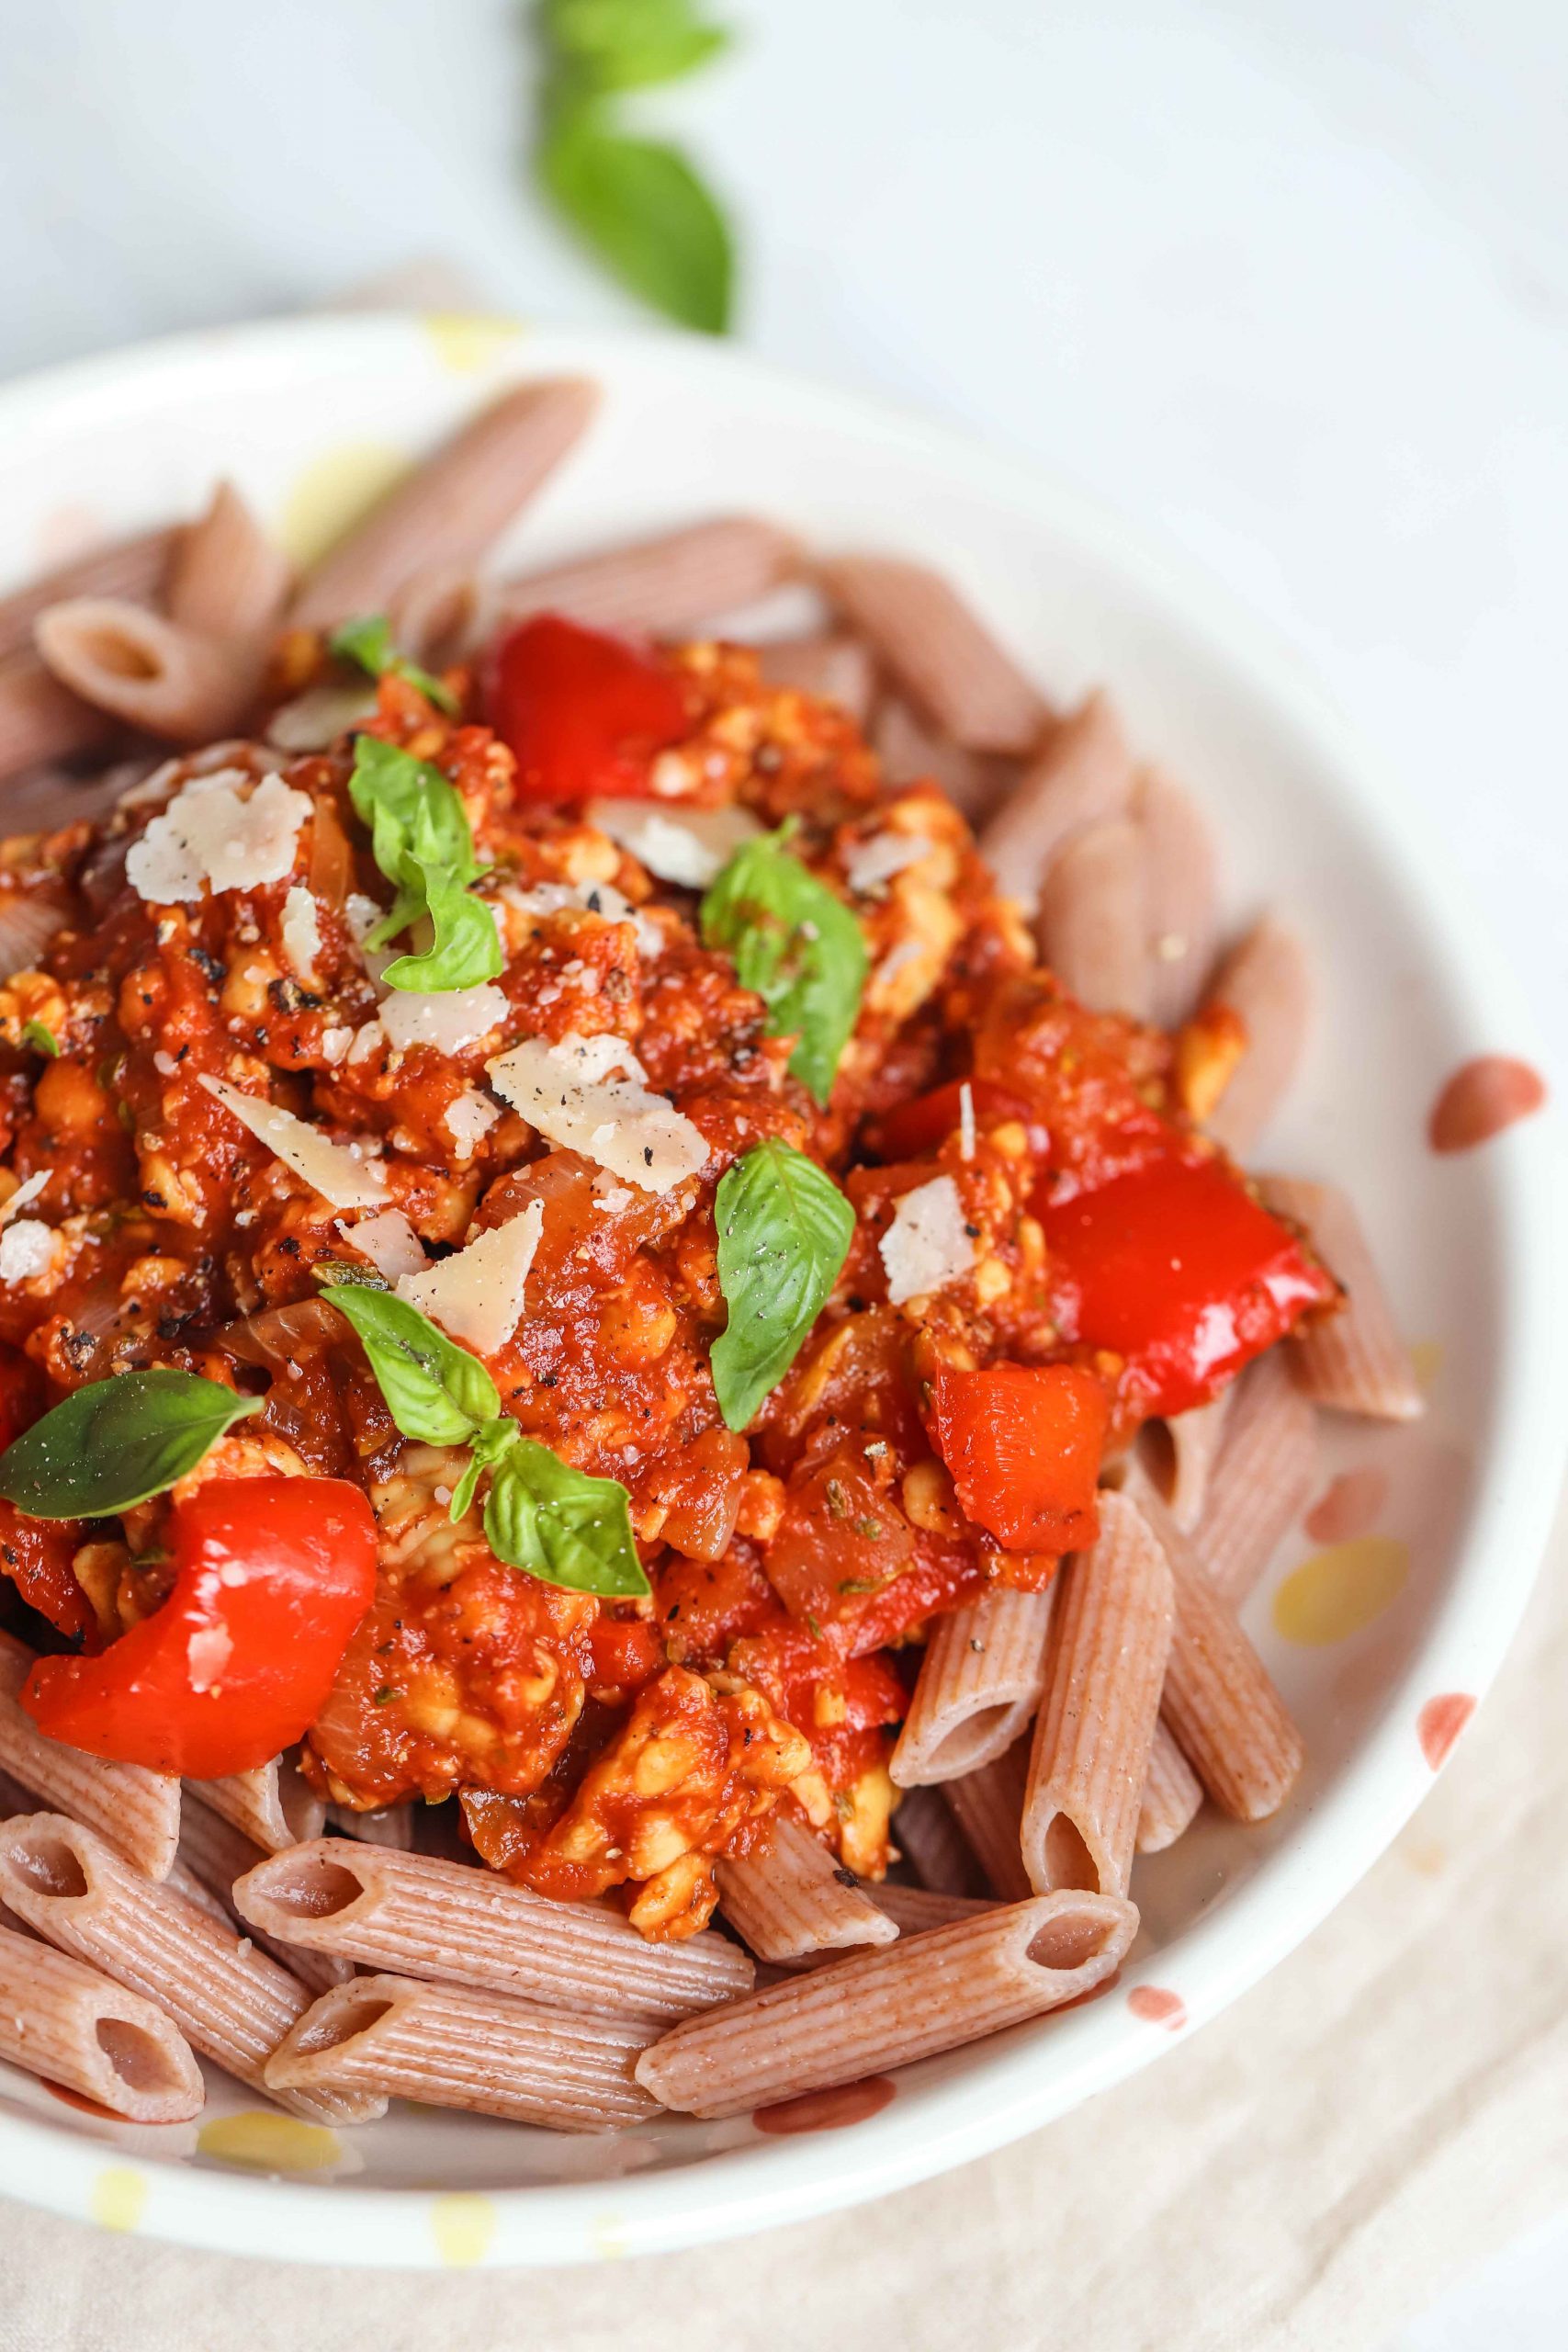 Tempeh Bolognese - Smiley's Points